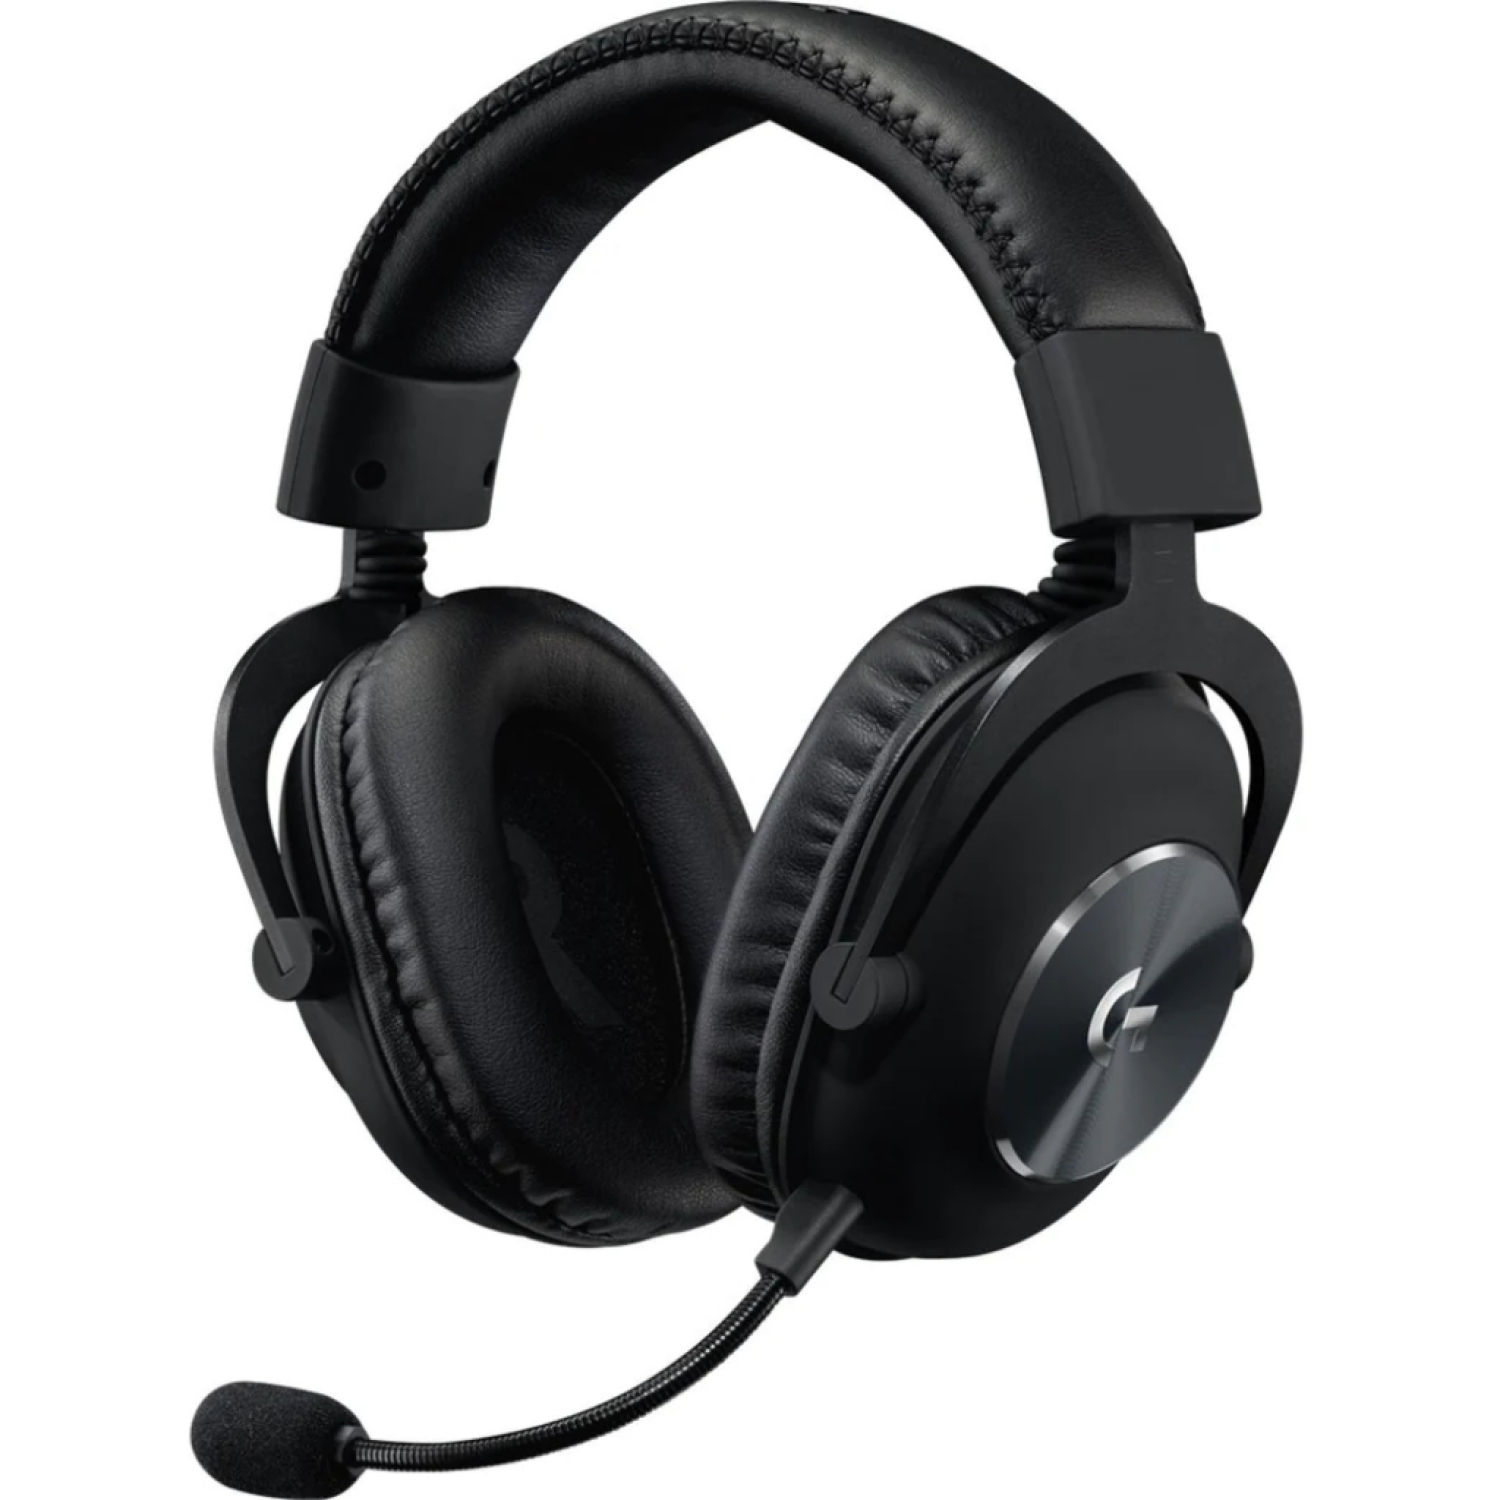 Logitech G Pro X Gaming Headset 981: Wired Headphones for PC Gaming, PS4, Xbox and Switch.